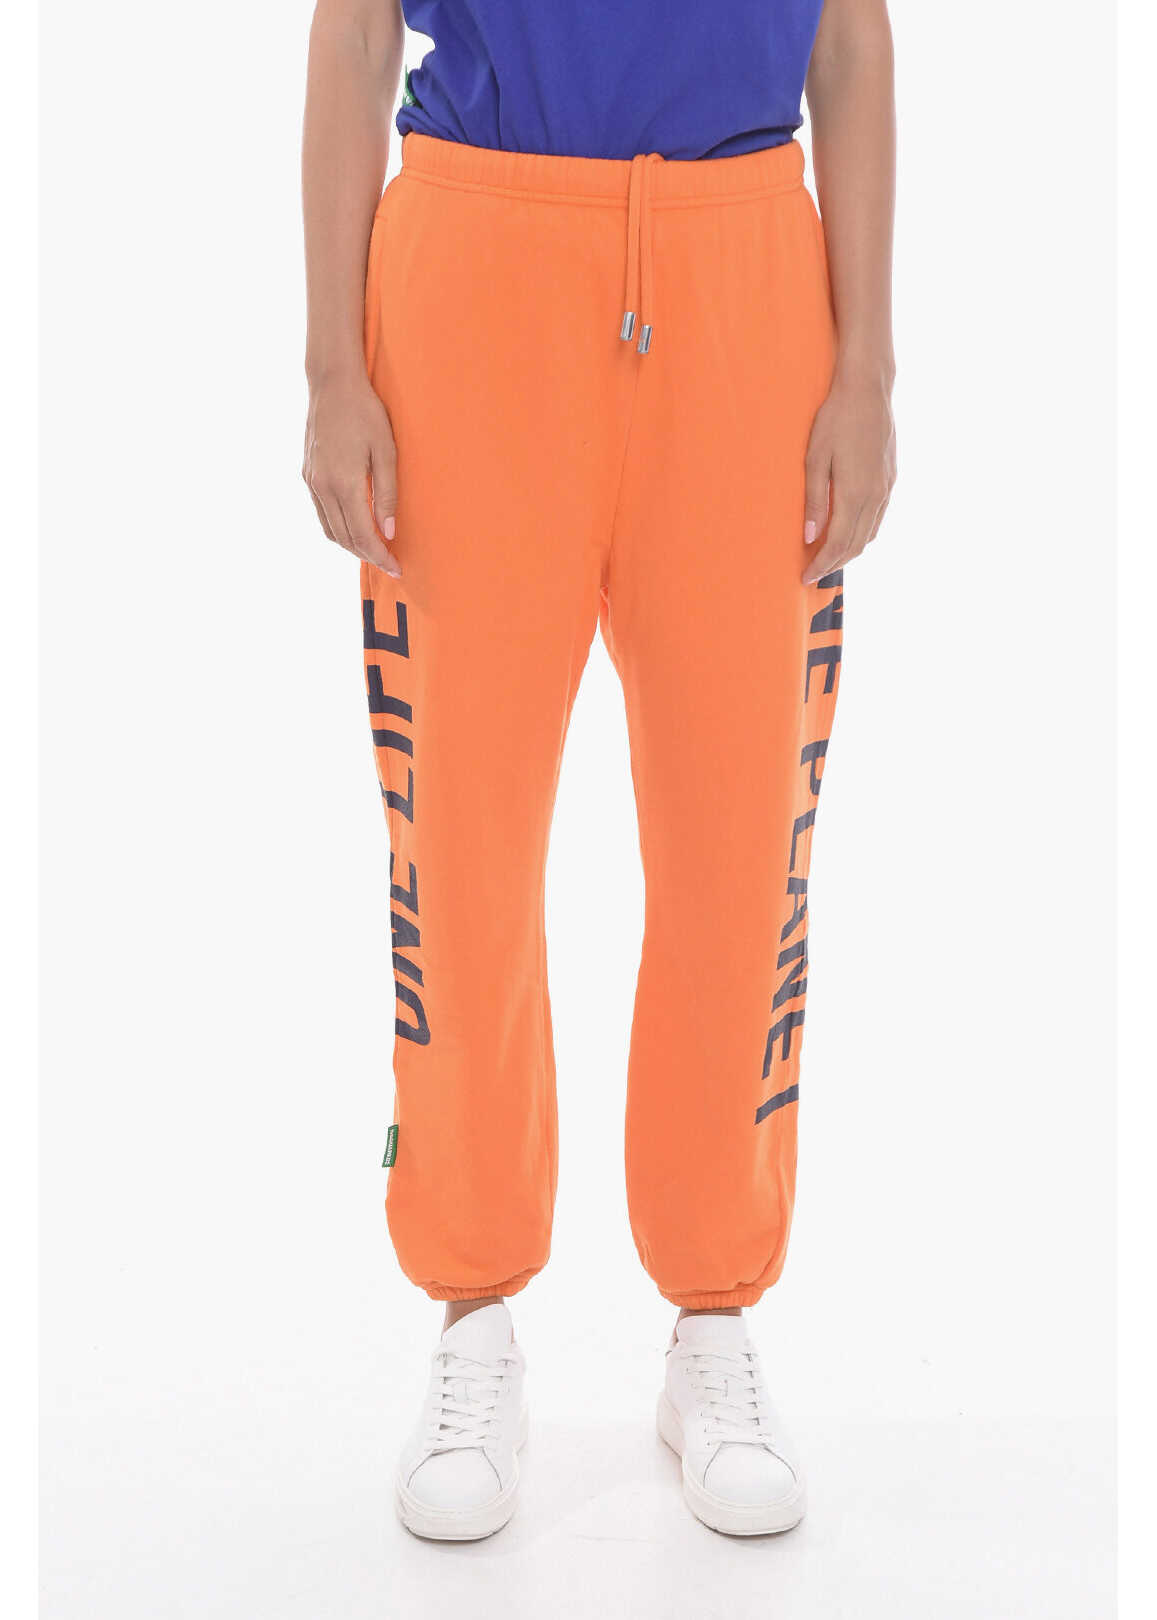 DSQUARED2 One Life One Planet Brushed Cotton Printed Sweatpants Orange